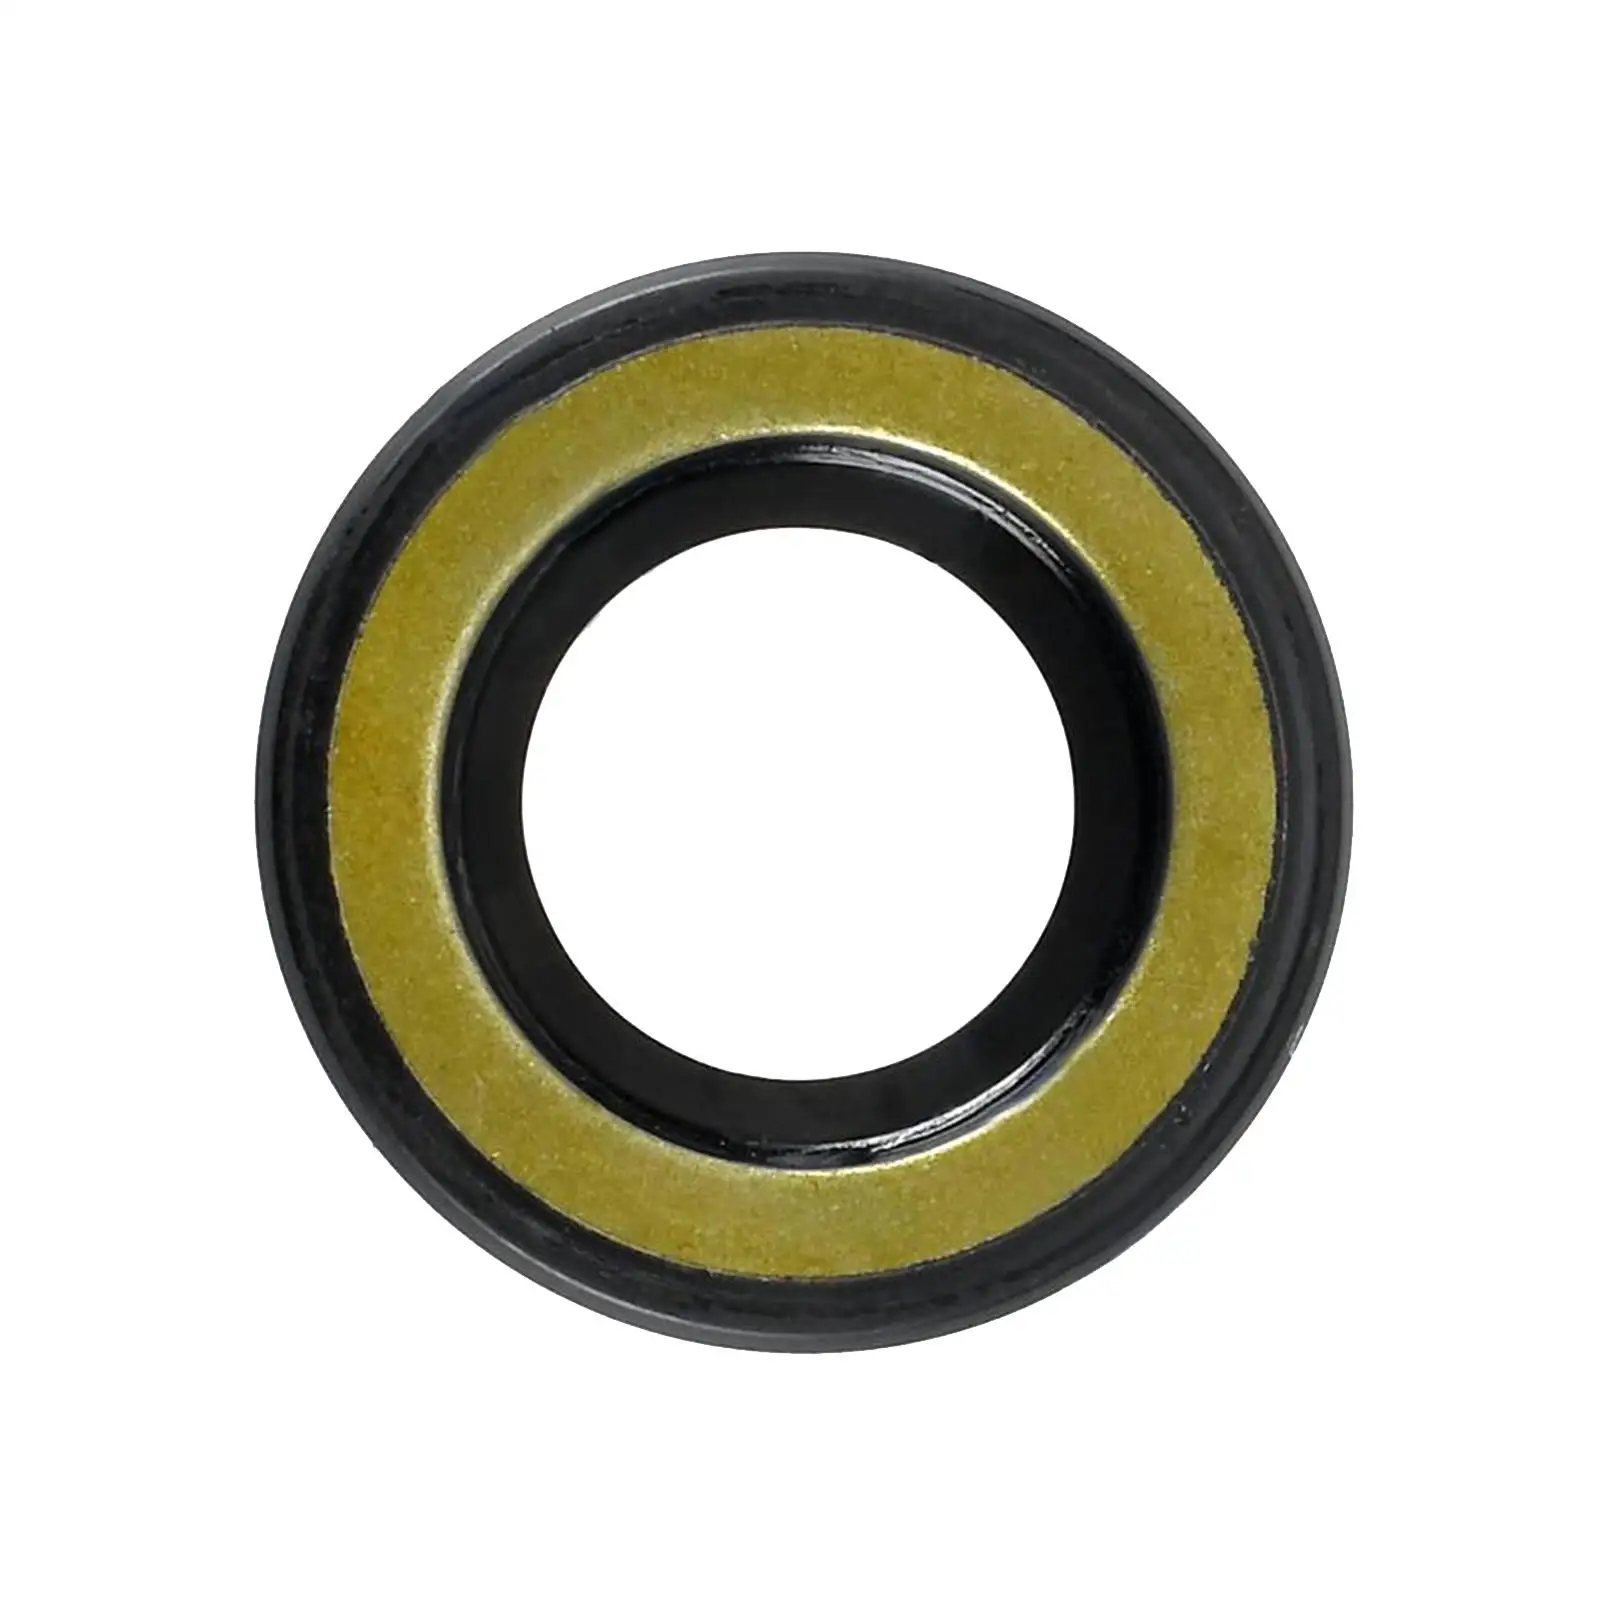 Oil Seal 93101-20M07 for Yamaha 2T 25HP 30HP Easy to Install Durable